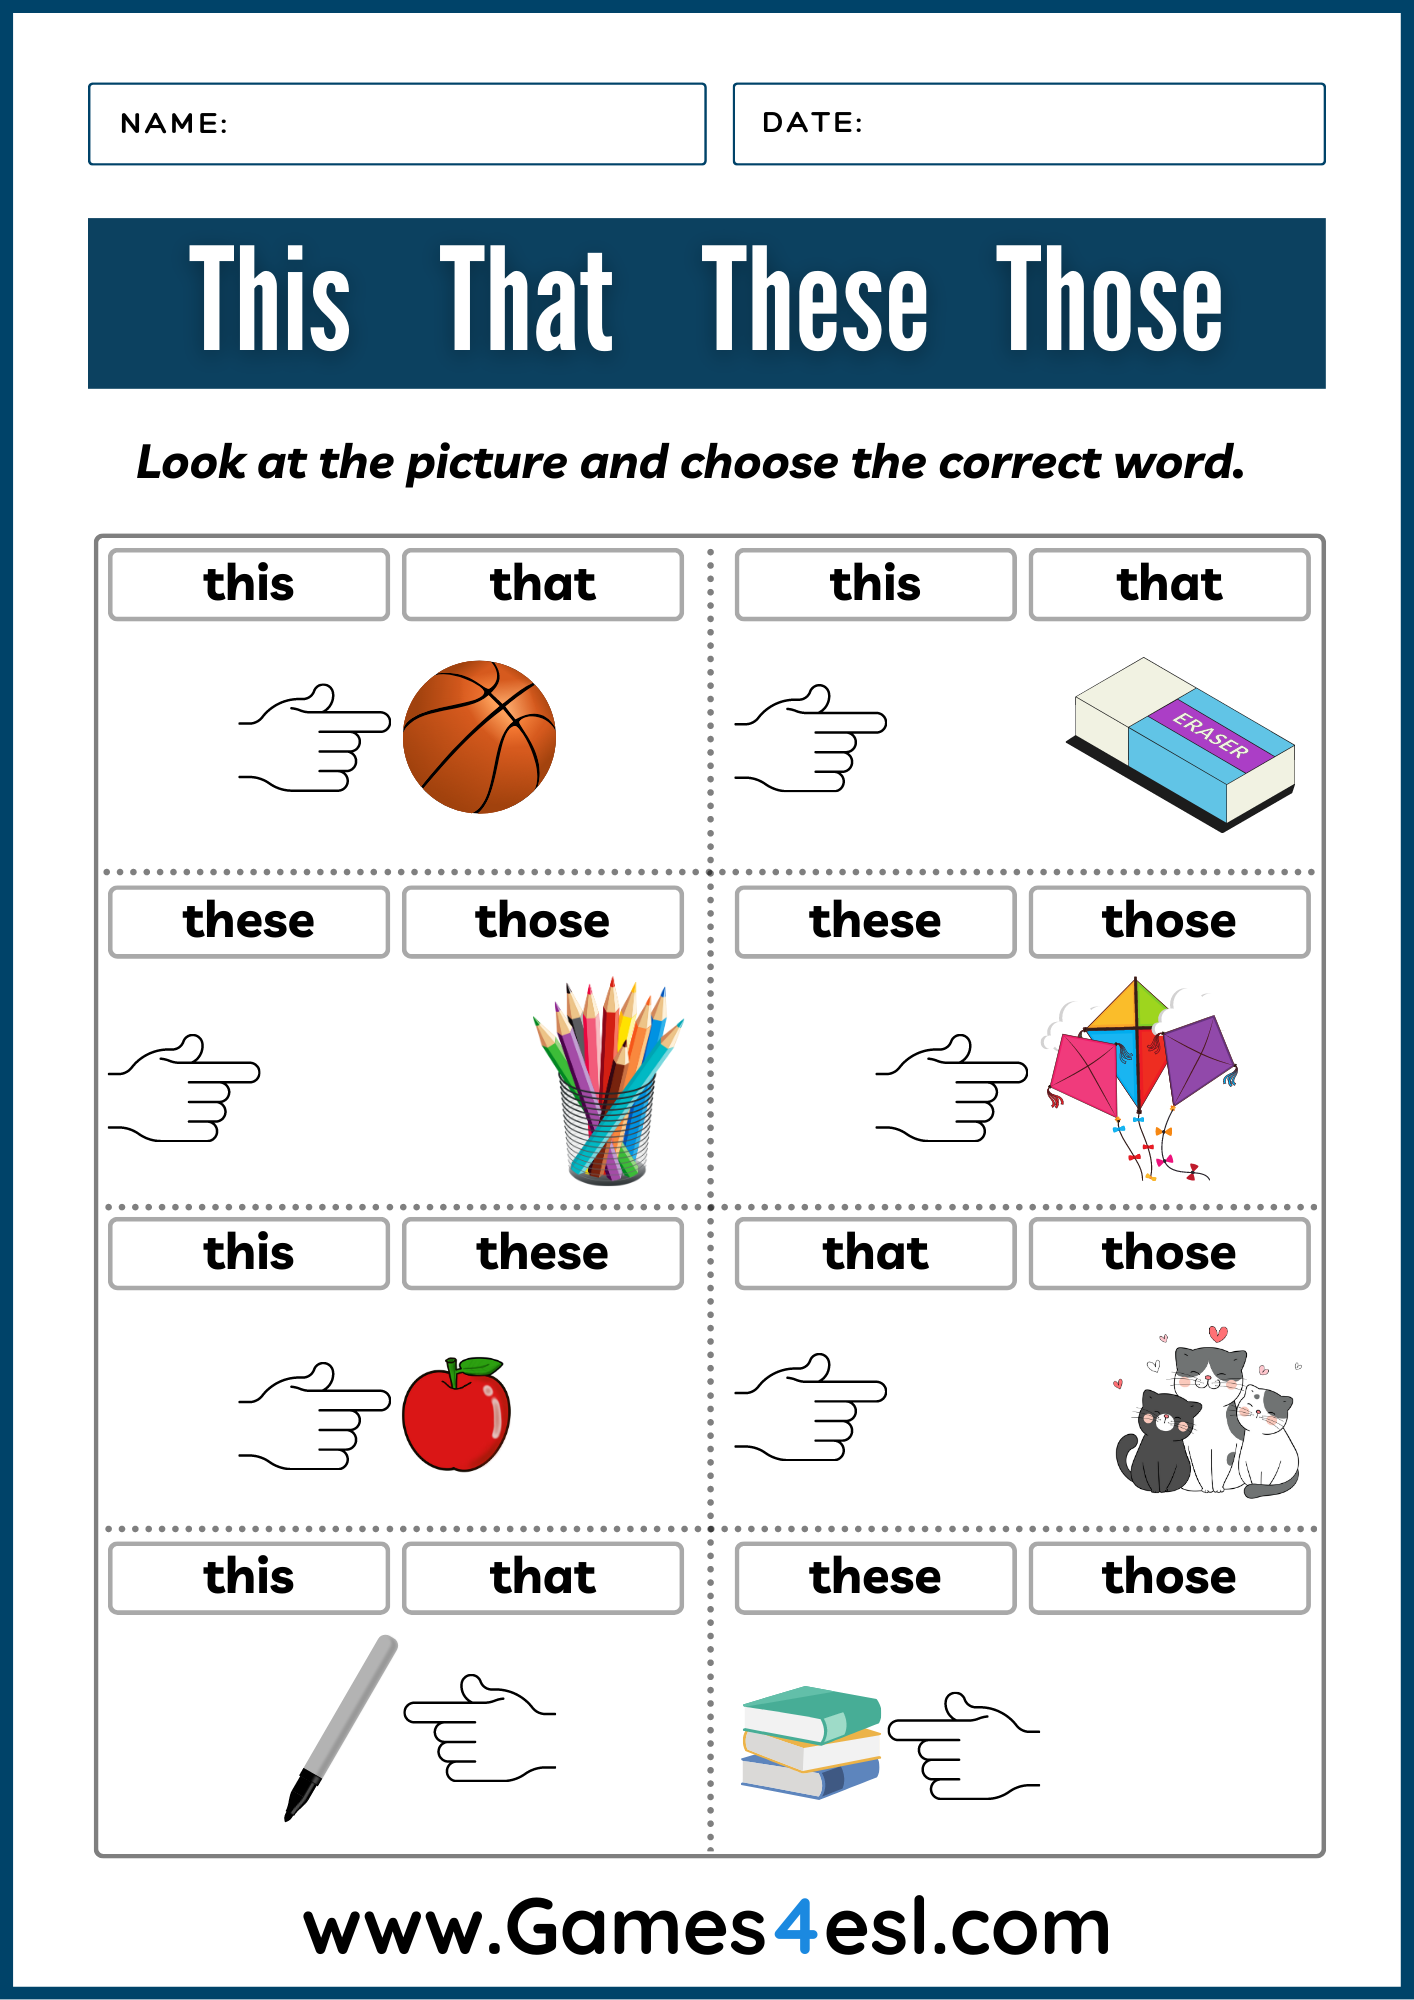 this-that-these-those-worksheets-printable-demonstrative-pronoun-exercises-games4esl